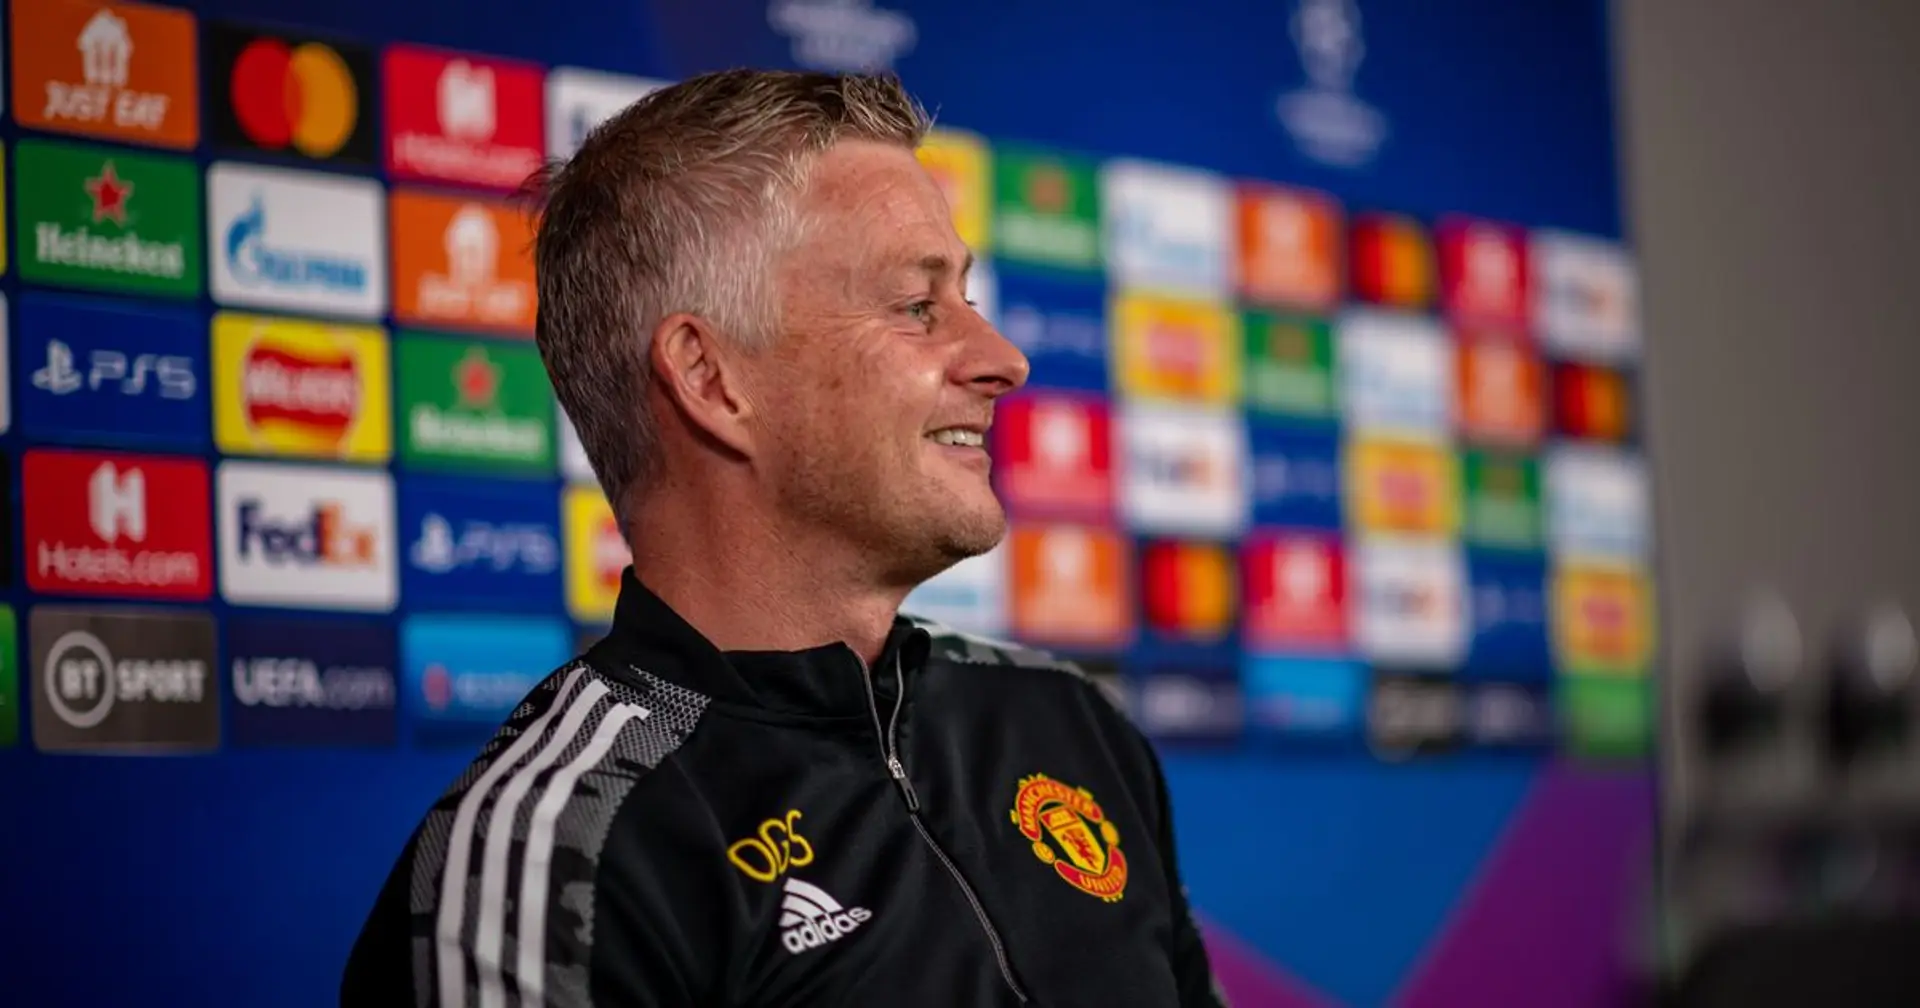 Ole clarifies controversial Rashford comments & 3 more big Man United stories you might've missed